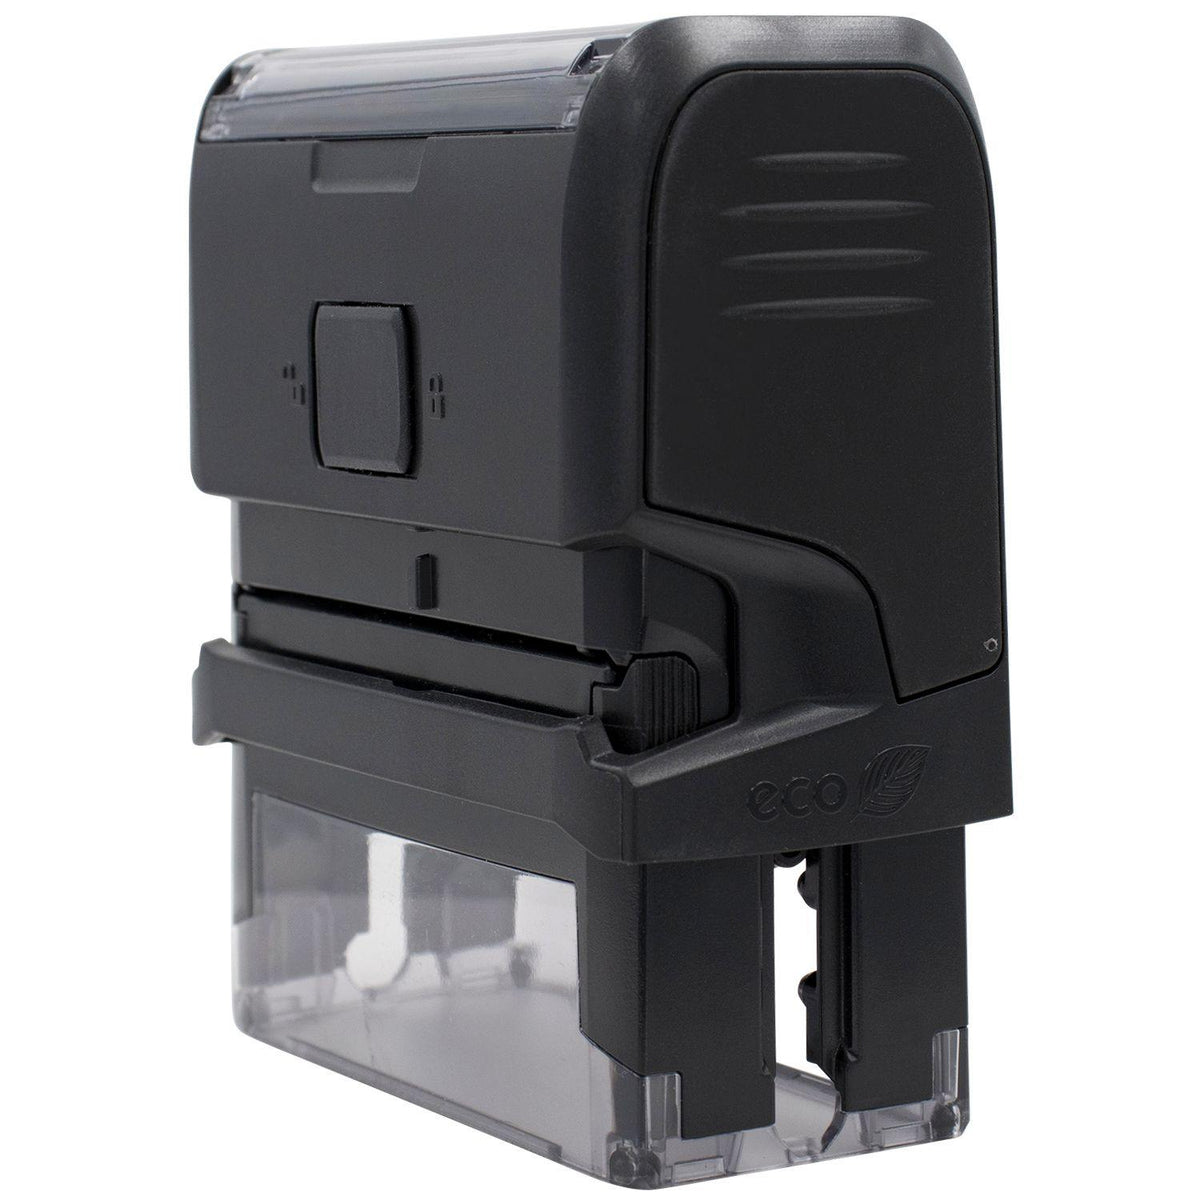 Large Self-Inking Credito Stamp - Engineer Seal Stamps - Brand_Trodat, Impression Size_Large, Stamp Type_Self-Inking Stamp, Type of Use_Finance, Type of Use_Office